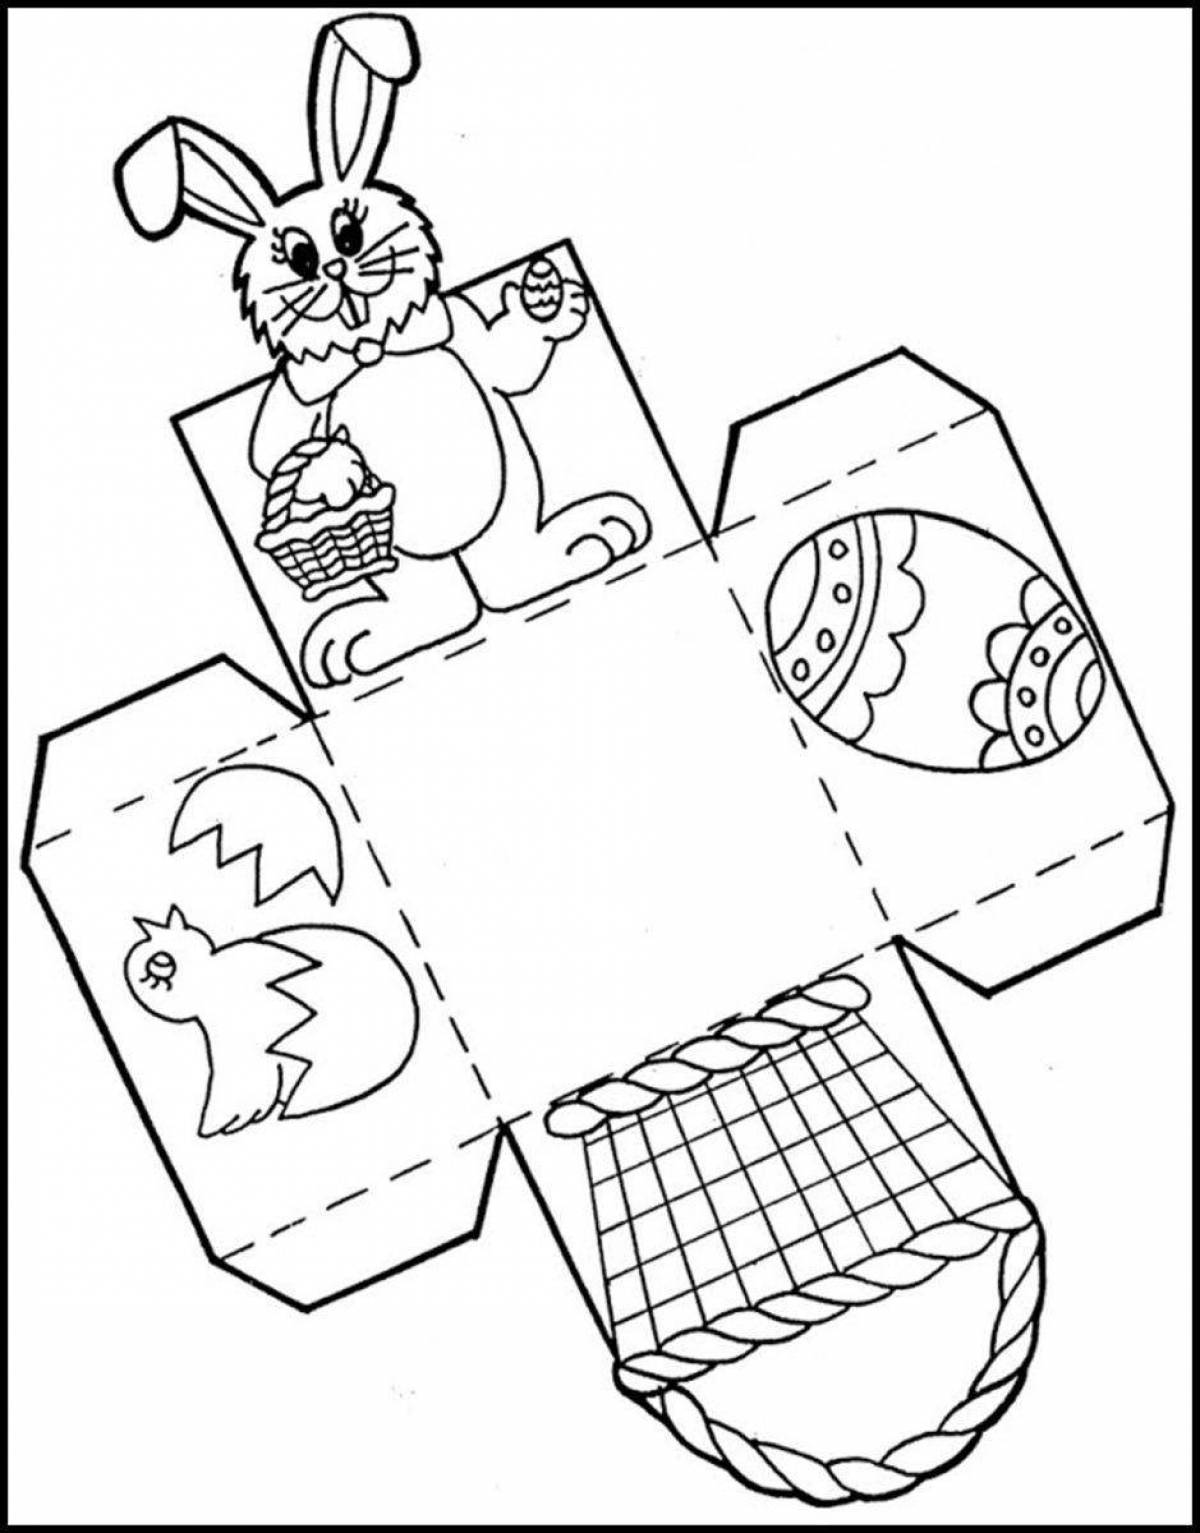 Coloring page with dynamic diy templates